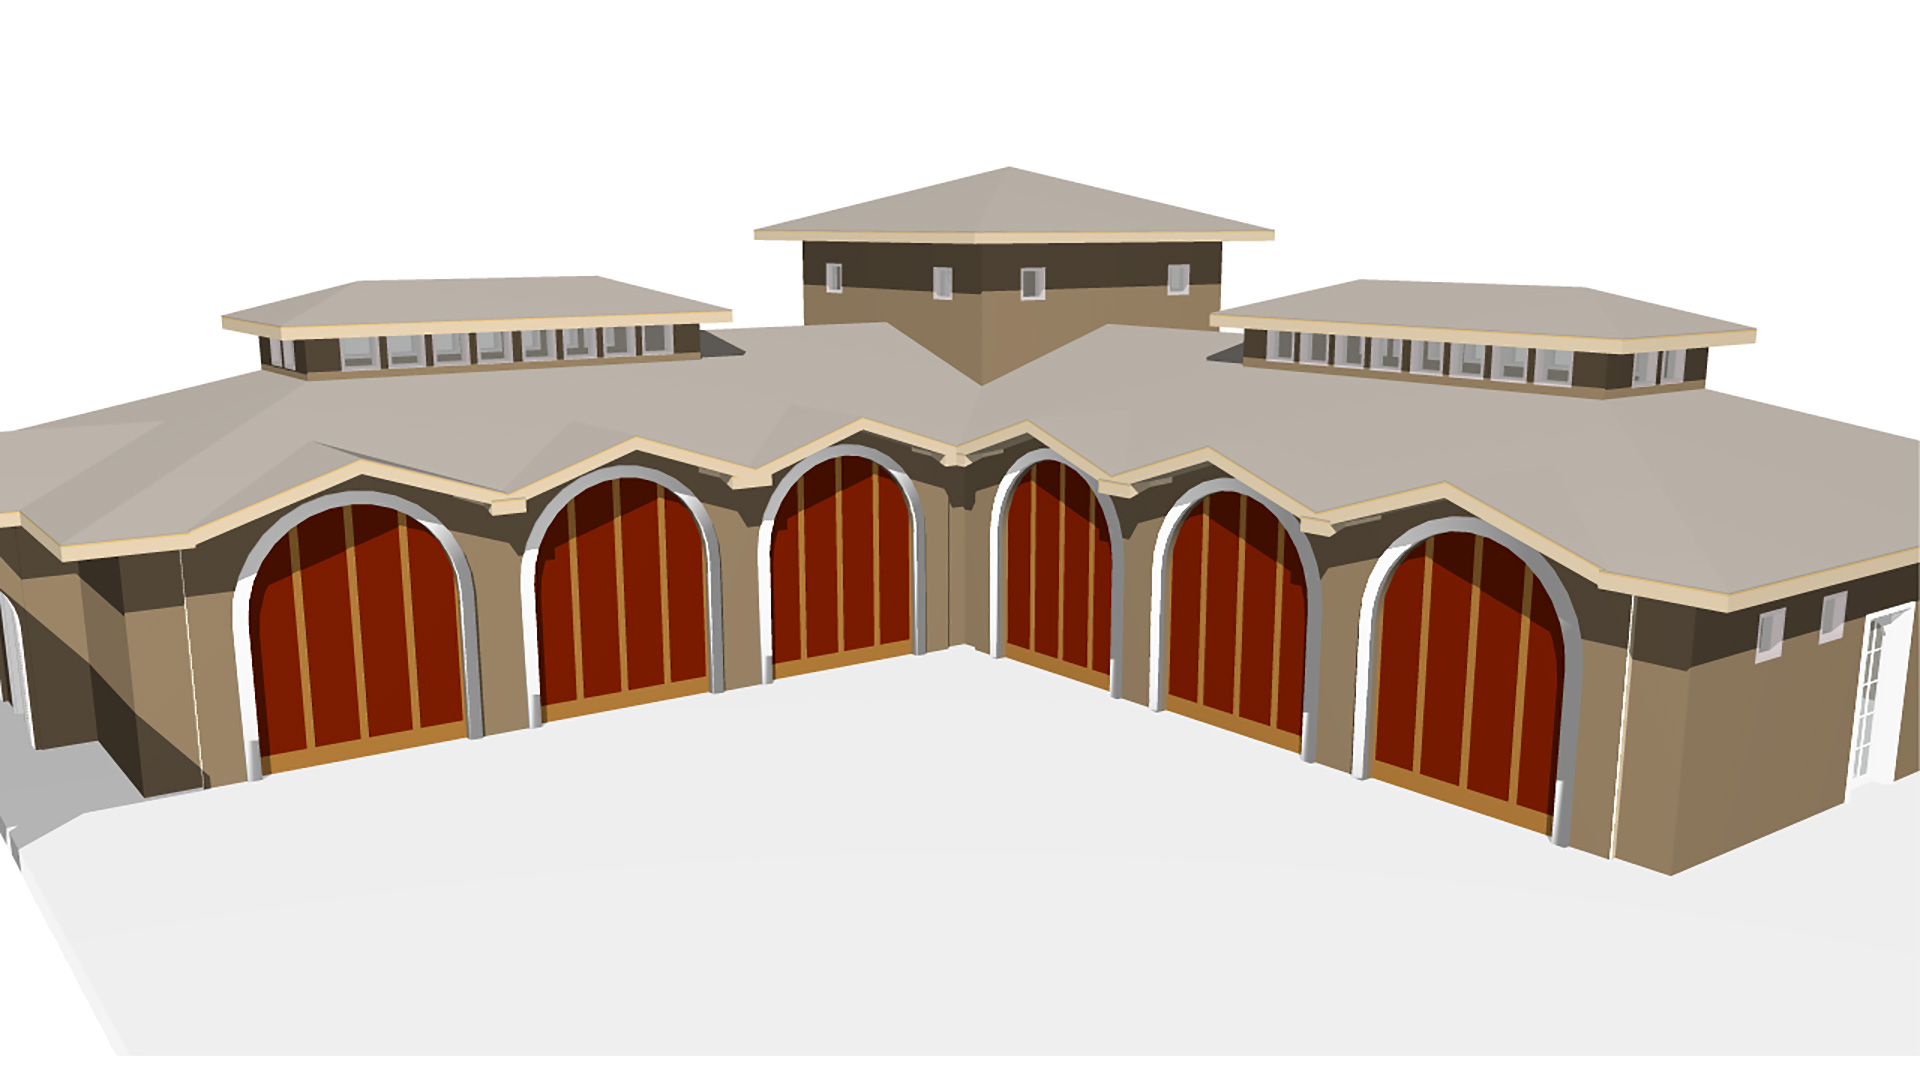 Rendering of garage area with many doors and monitors above